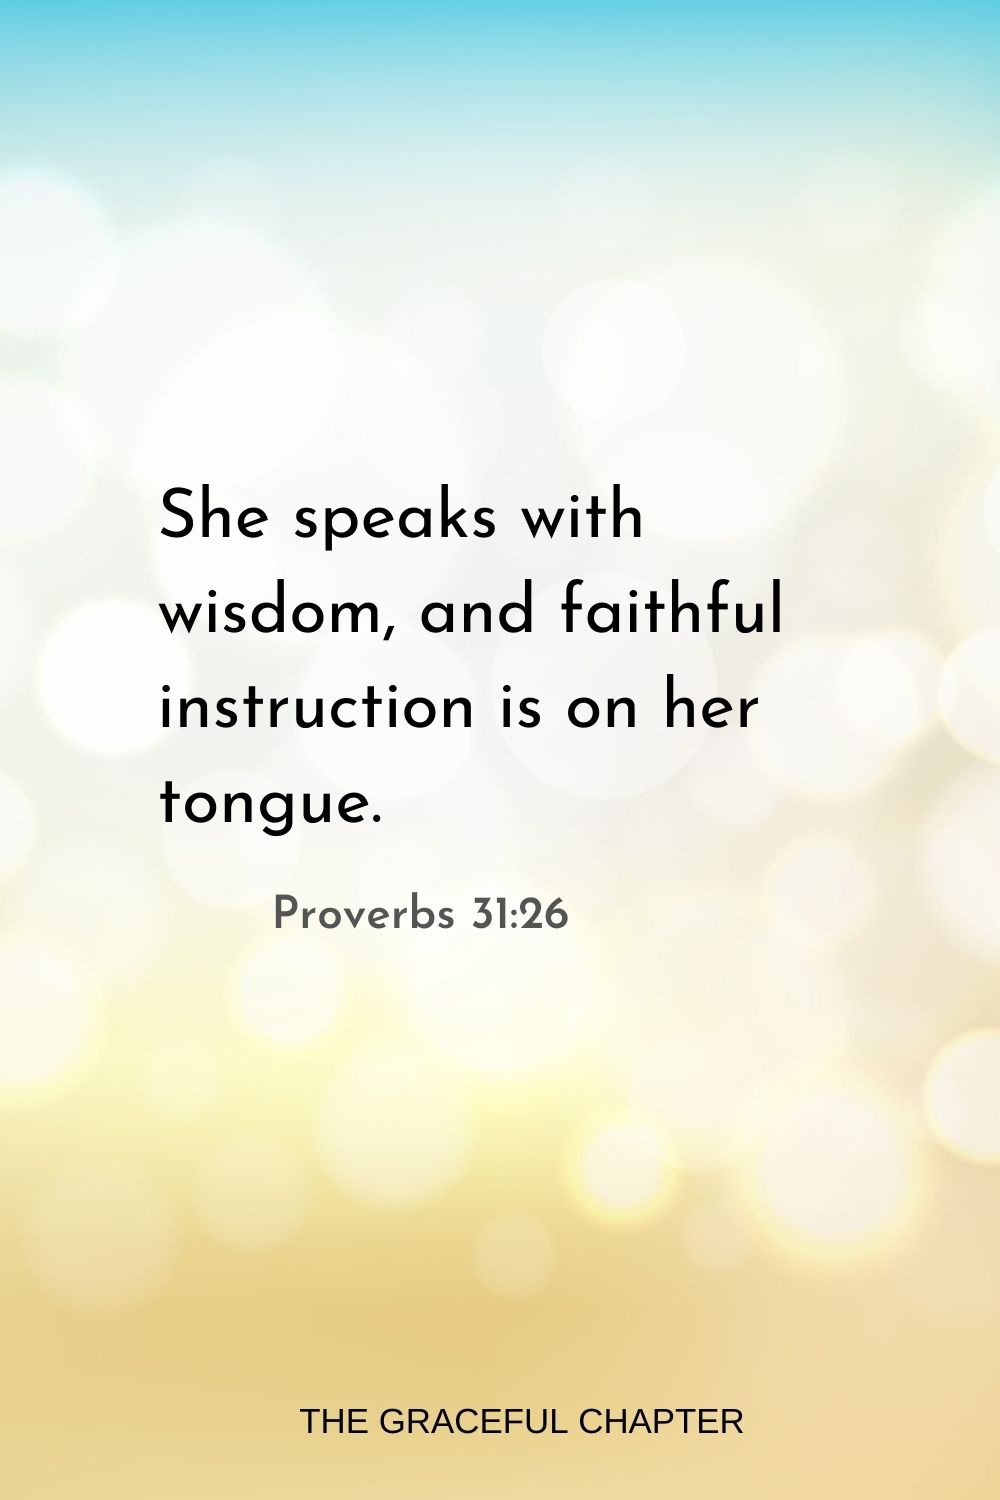 She speaks with wisdom, and faithful instruction is on her tongue. Proverbs 31:26